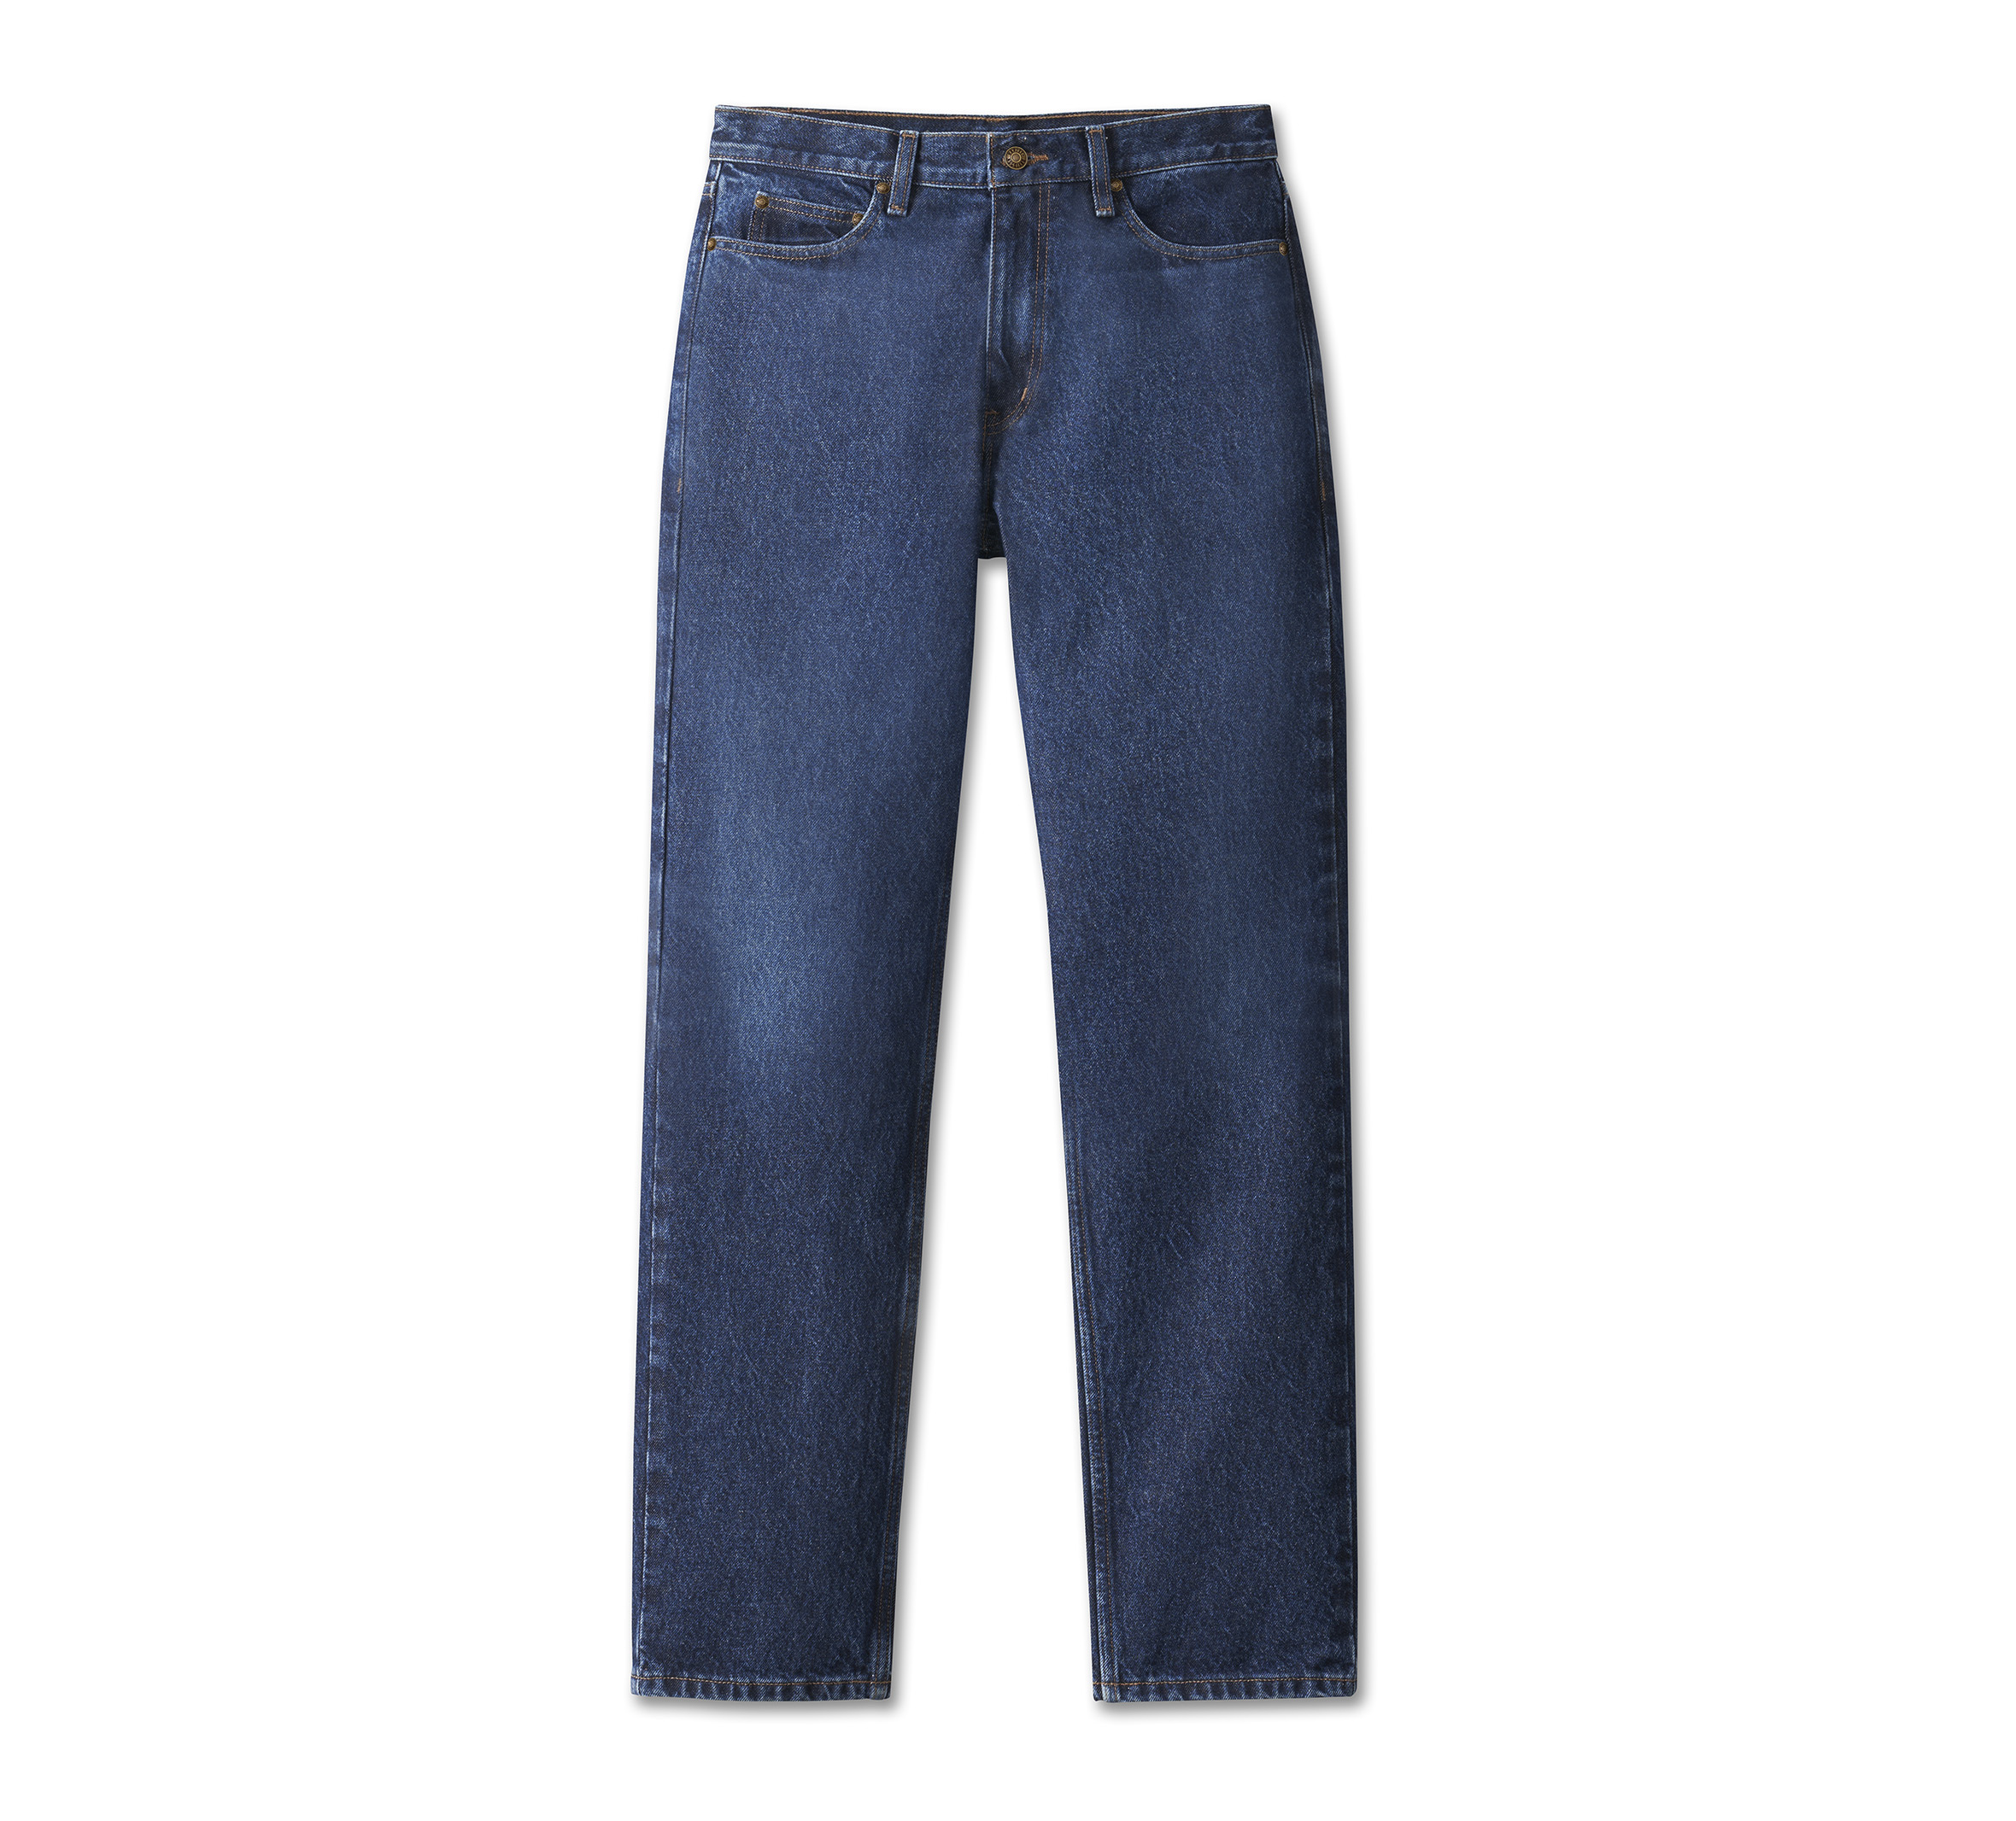 Washes of Jeans - Denim Jeans and Fashion